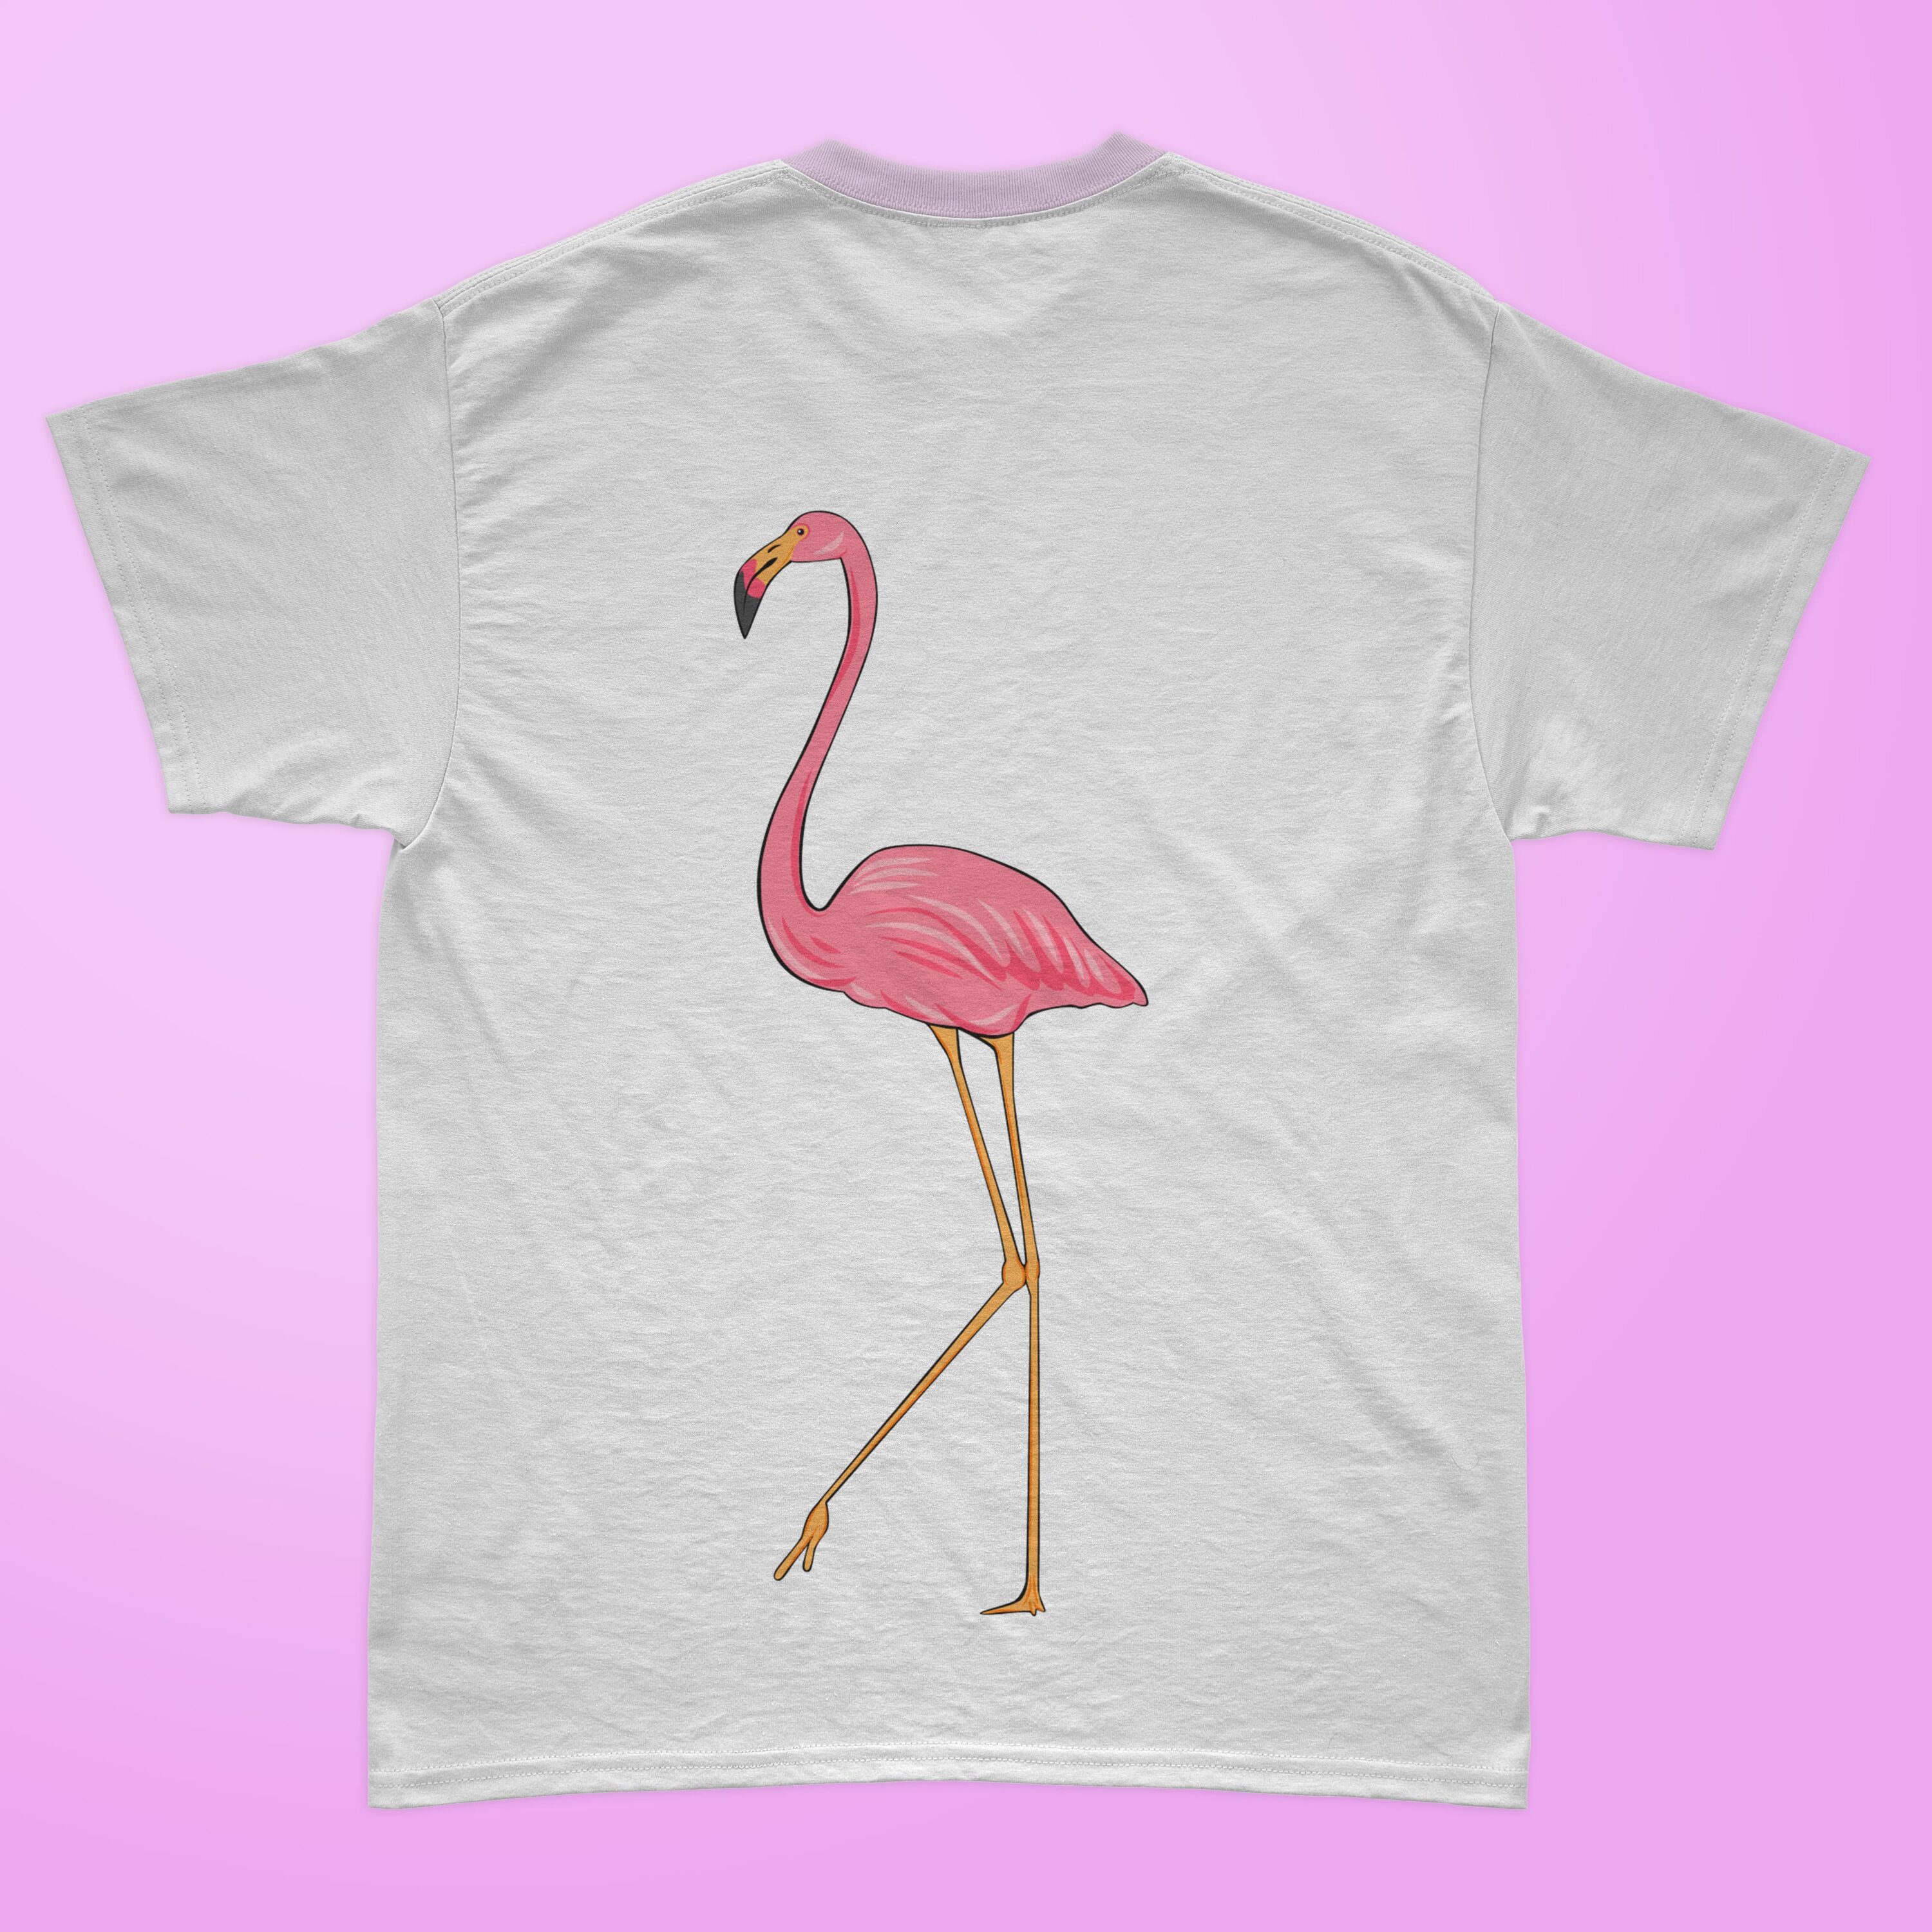 Proud pink flamingo on the white t-shirt.